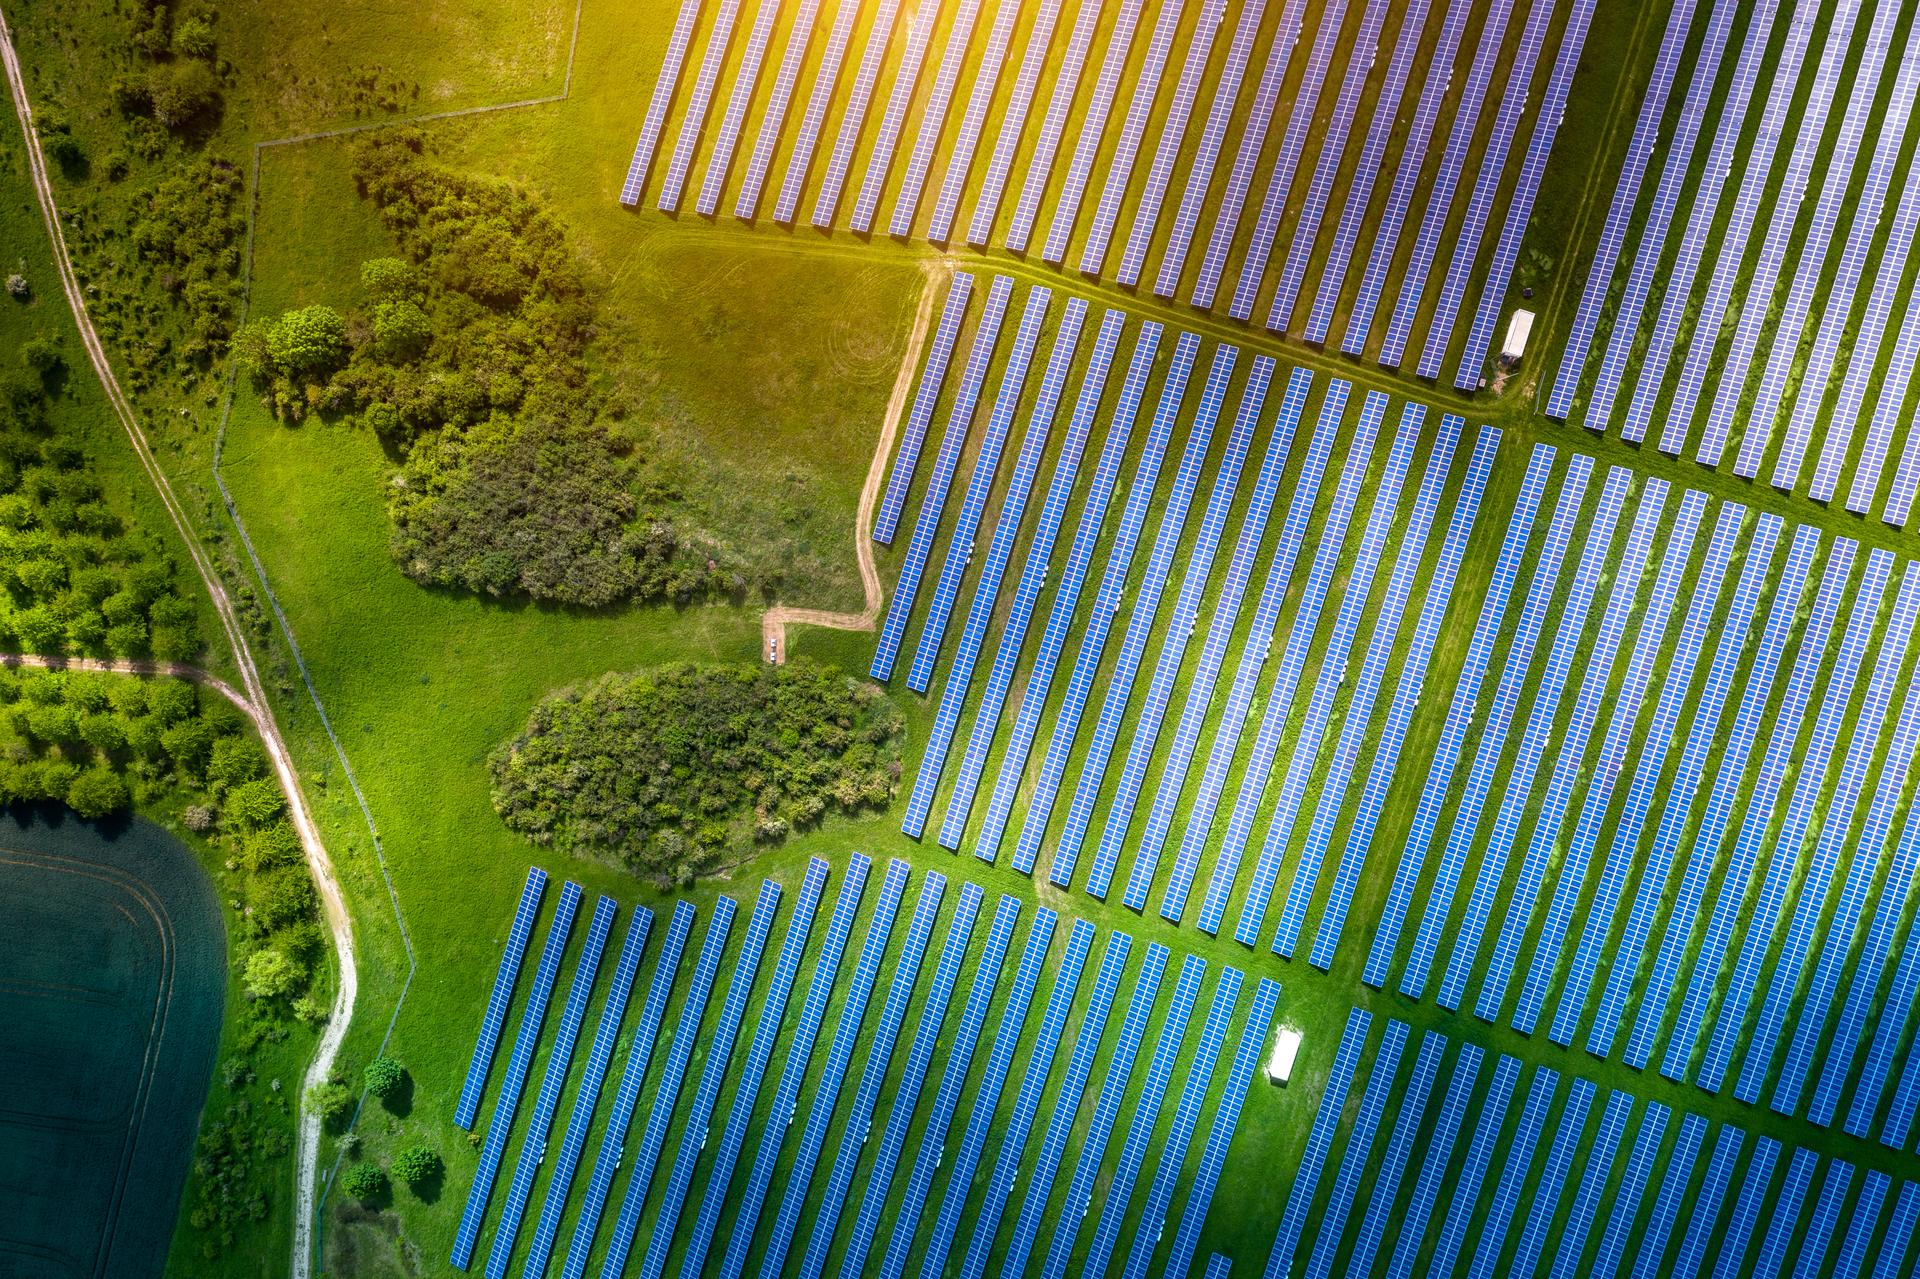 Vontobel's sustainable investment opportunities - bird's eye view from a solar installation